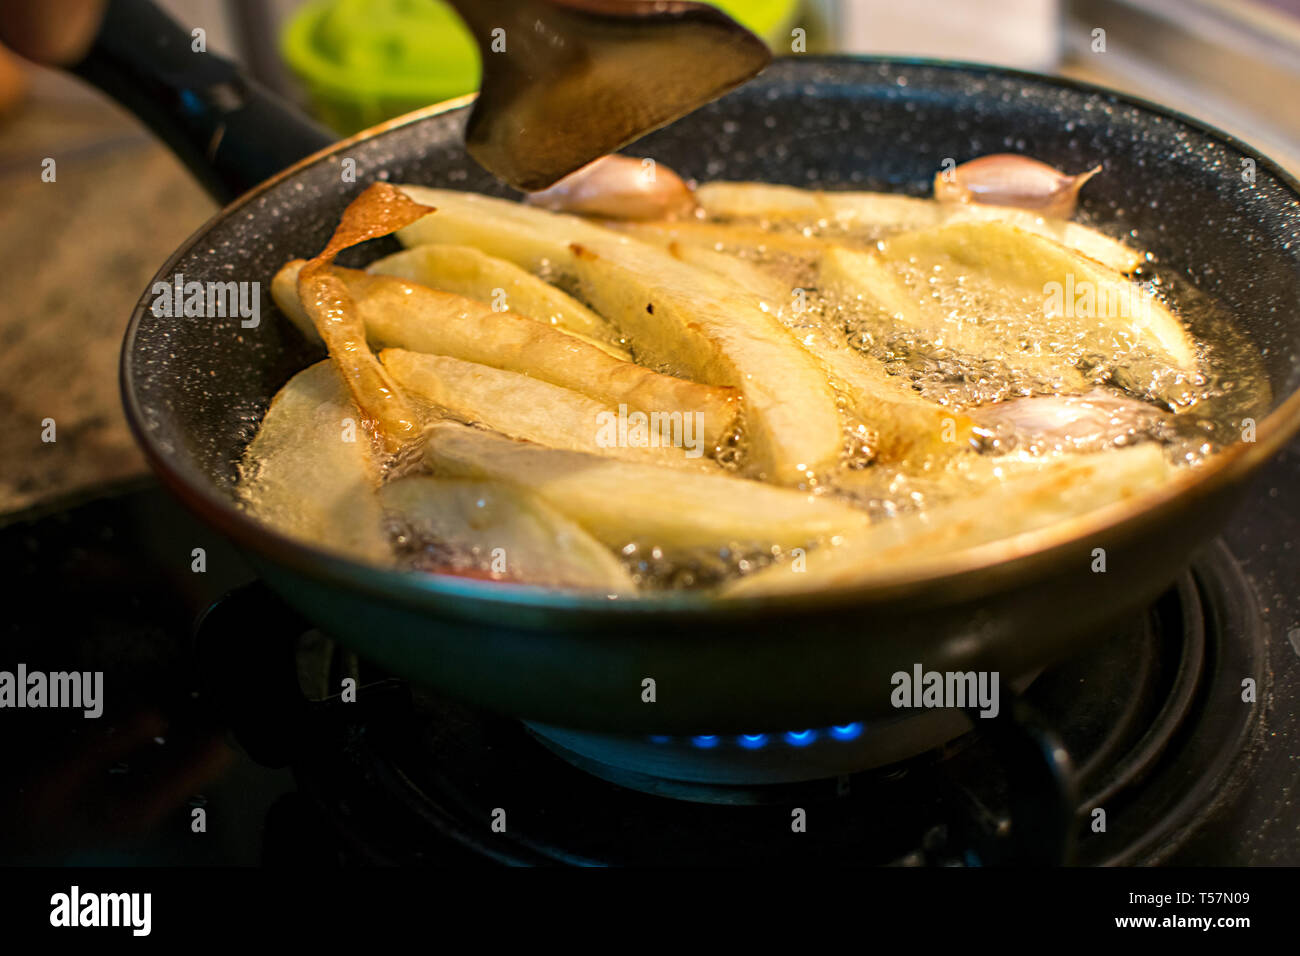 https://c8.alamy.com/comp/T57N09/frying-fries-and-garlic-in-oil-boiling-beautifully-on-old-cast-iron-pan-cooking-fry-potatoes-in-pan-in-spain2019-T57N09.jpg